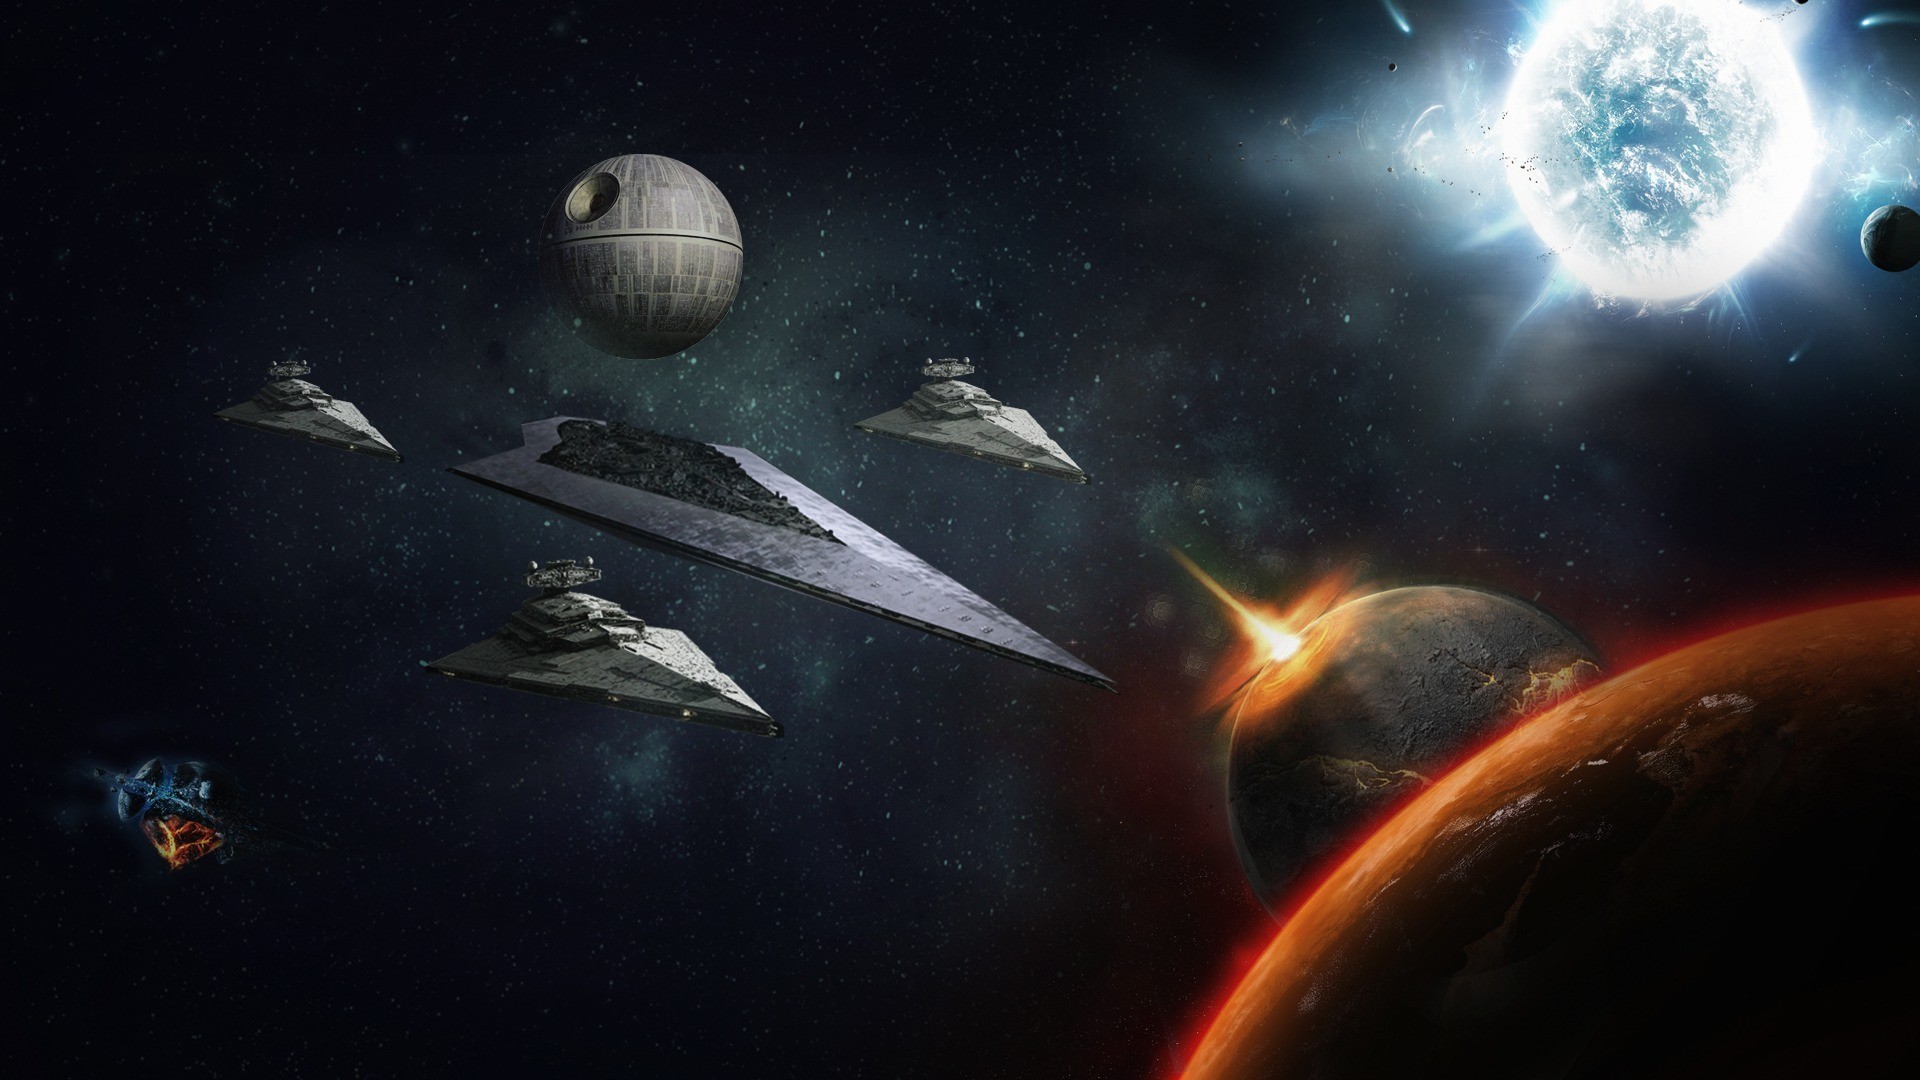 Star Wars Space Wallpaper 70 images